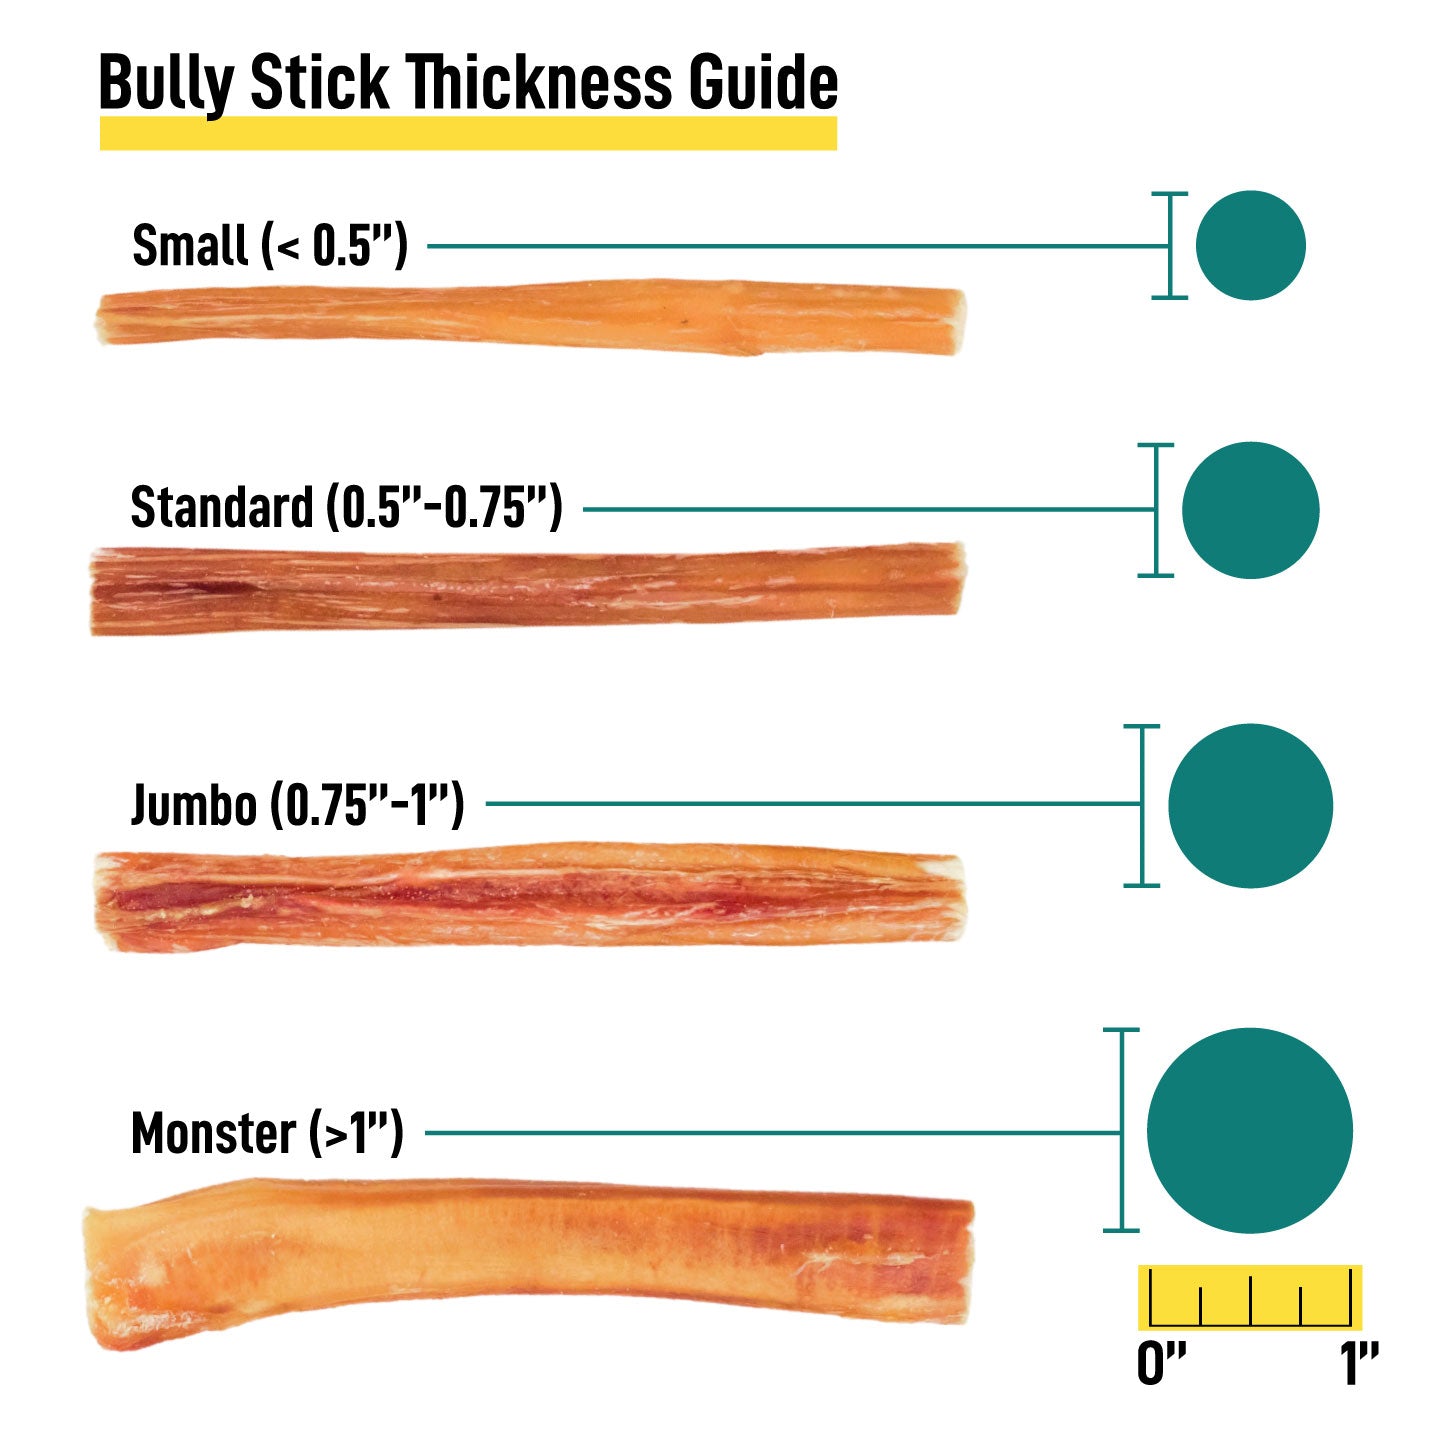 Thin Bully Sticks for Dogs - 12 Inch 6 and 12 Count - Best Dog Chews and Treats